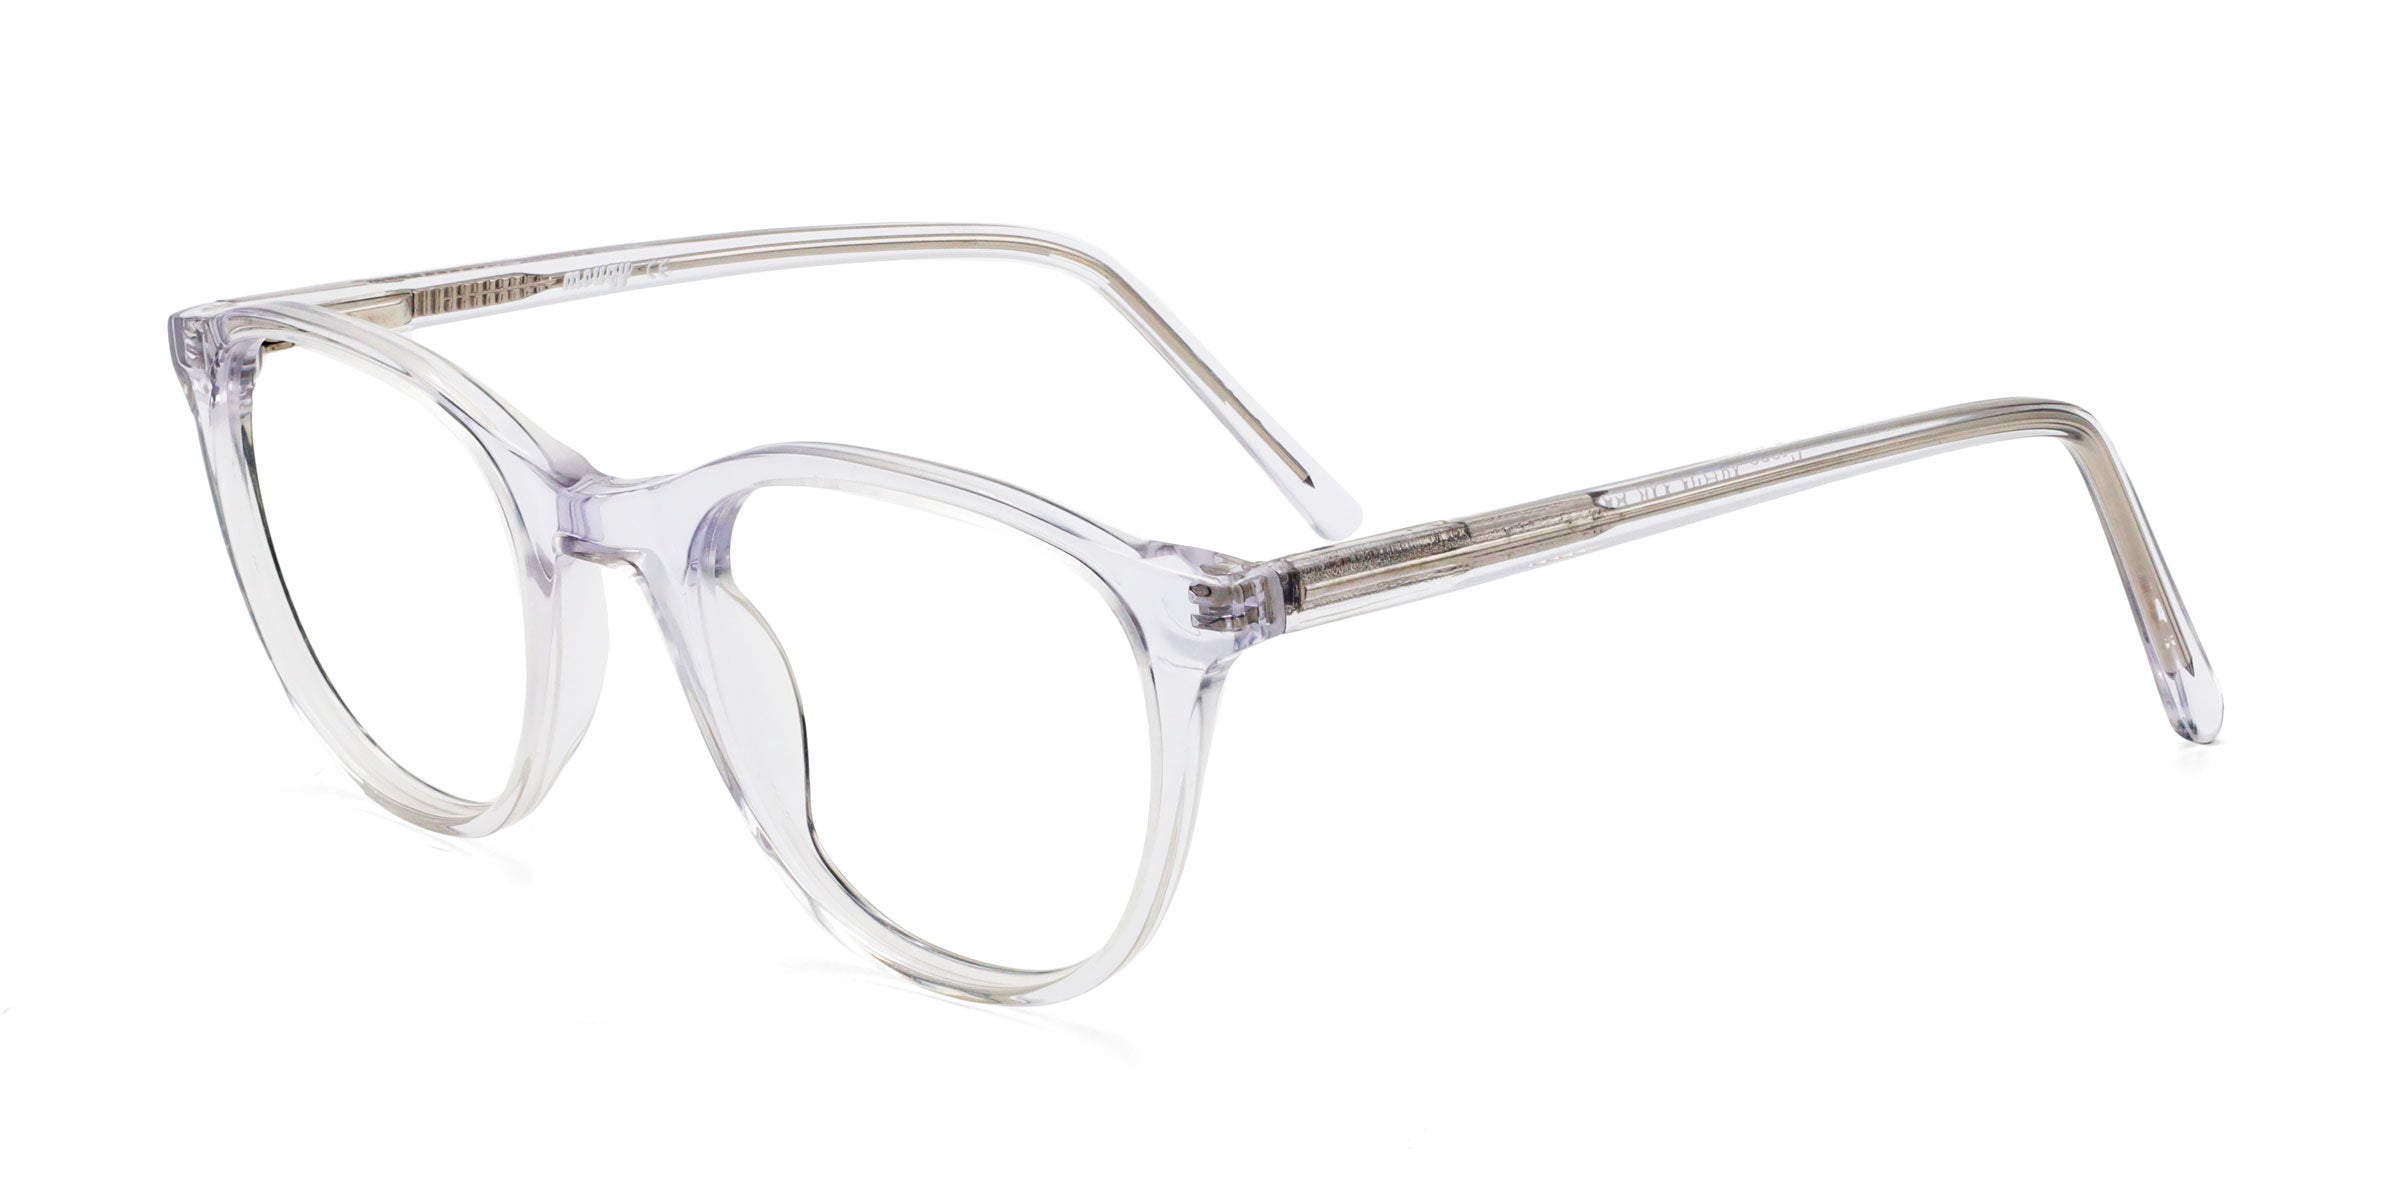 crane oval clear eyeglasses frames angled view